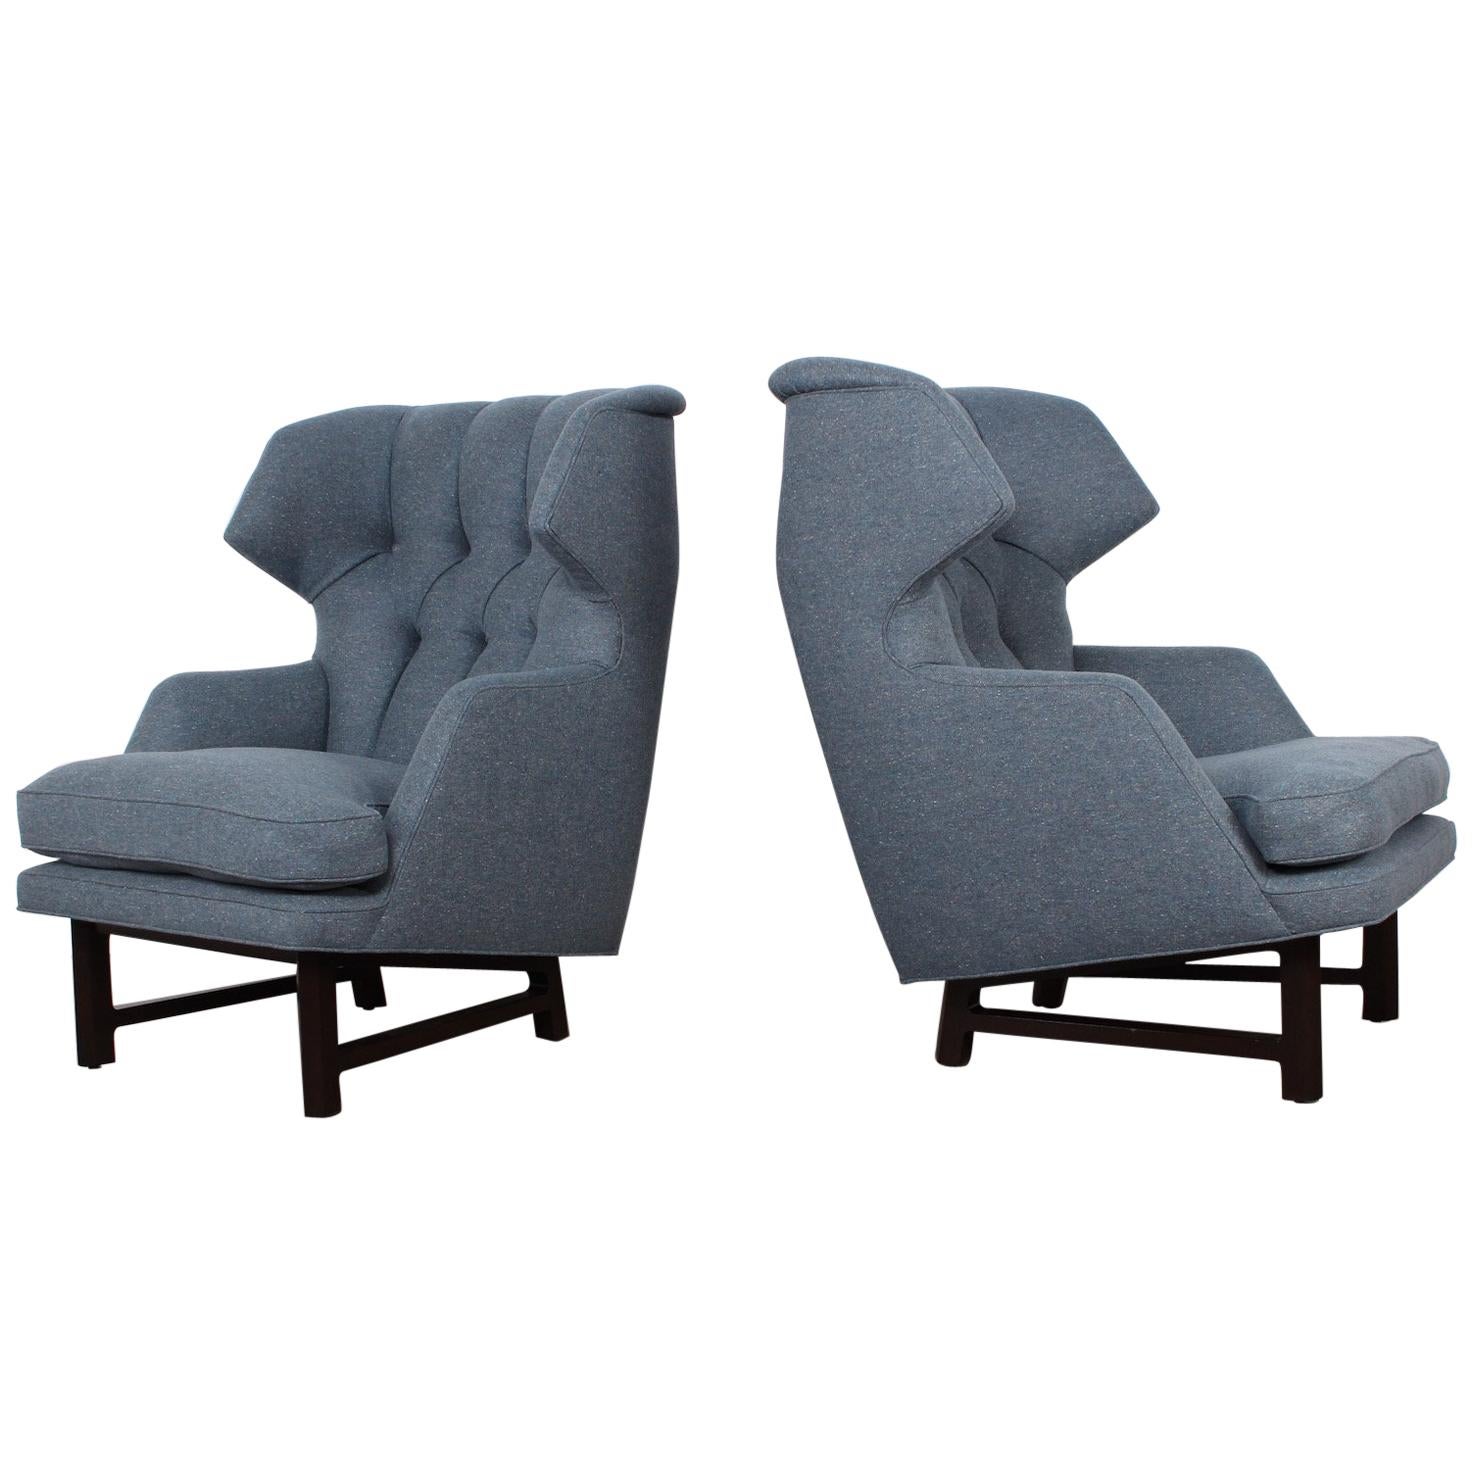 Pair of "Janus" Wing Chairs by Edward Wormley for Dunbar